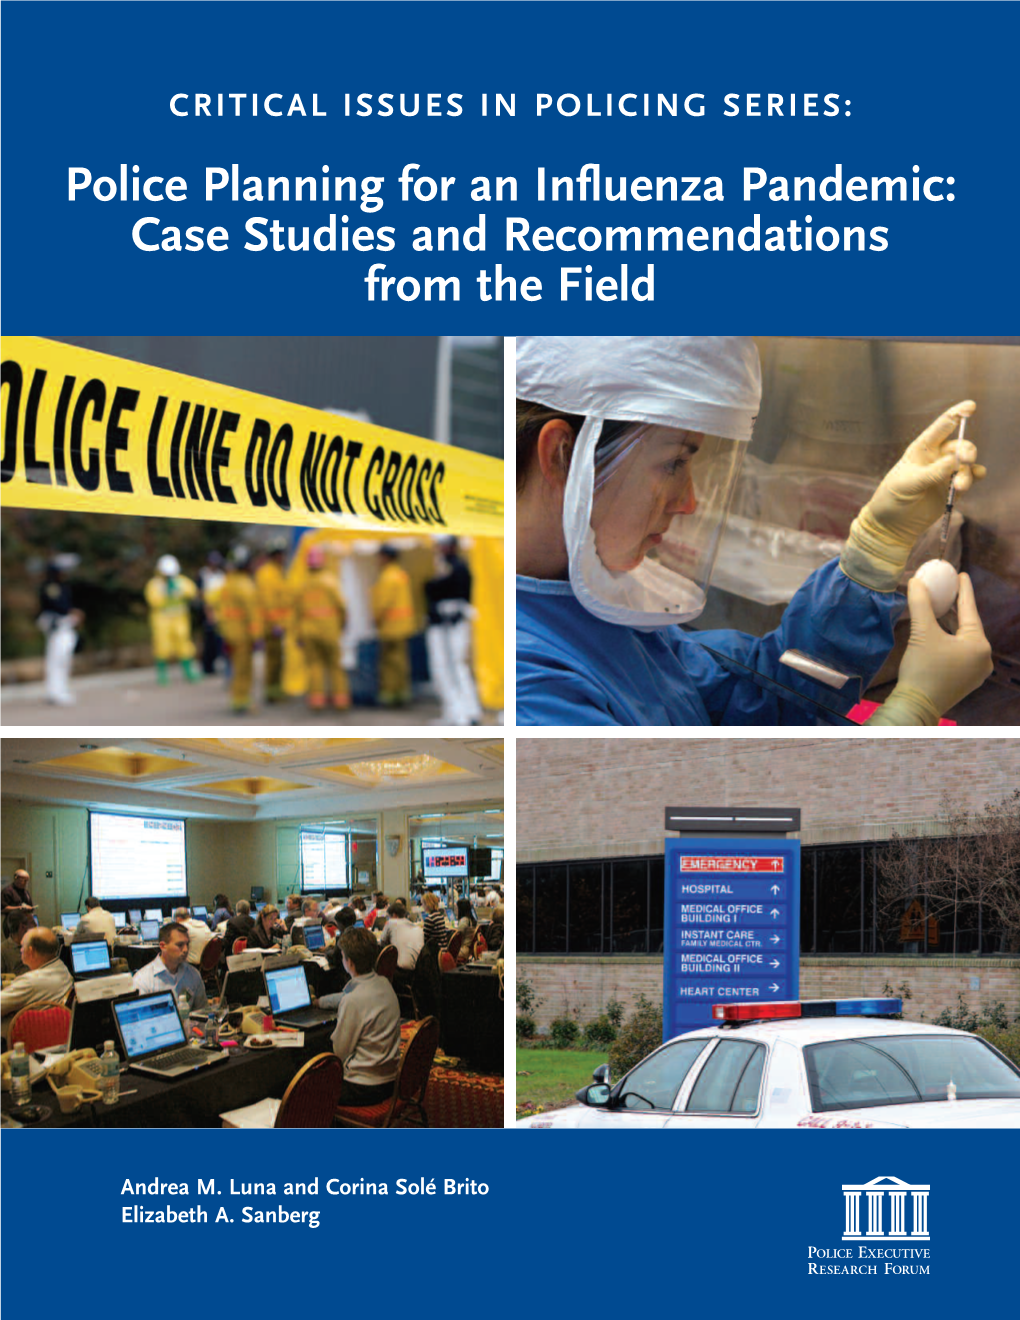 Police Planning for an Influenza Pandemic: Case Studies and Recommendations from the Field